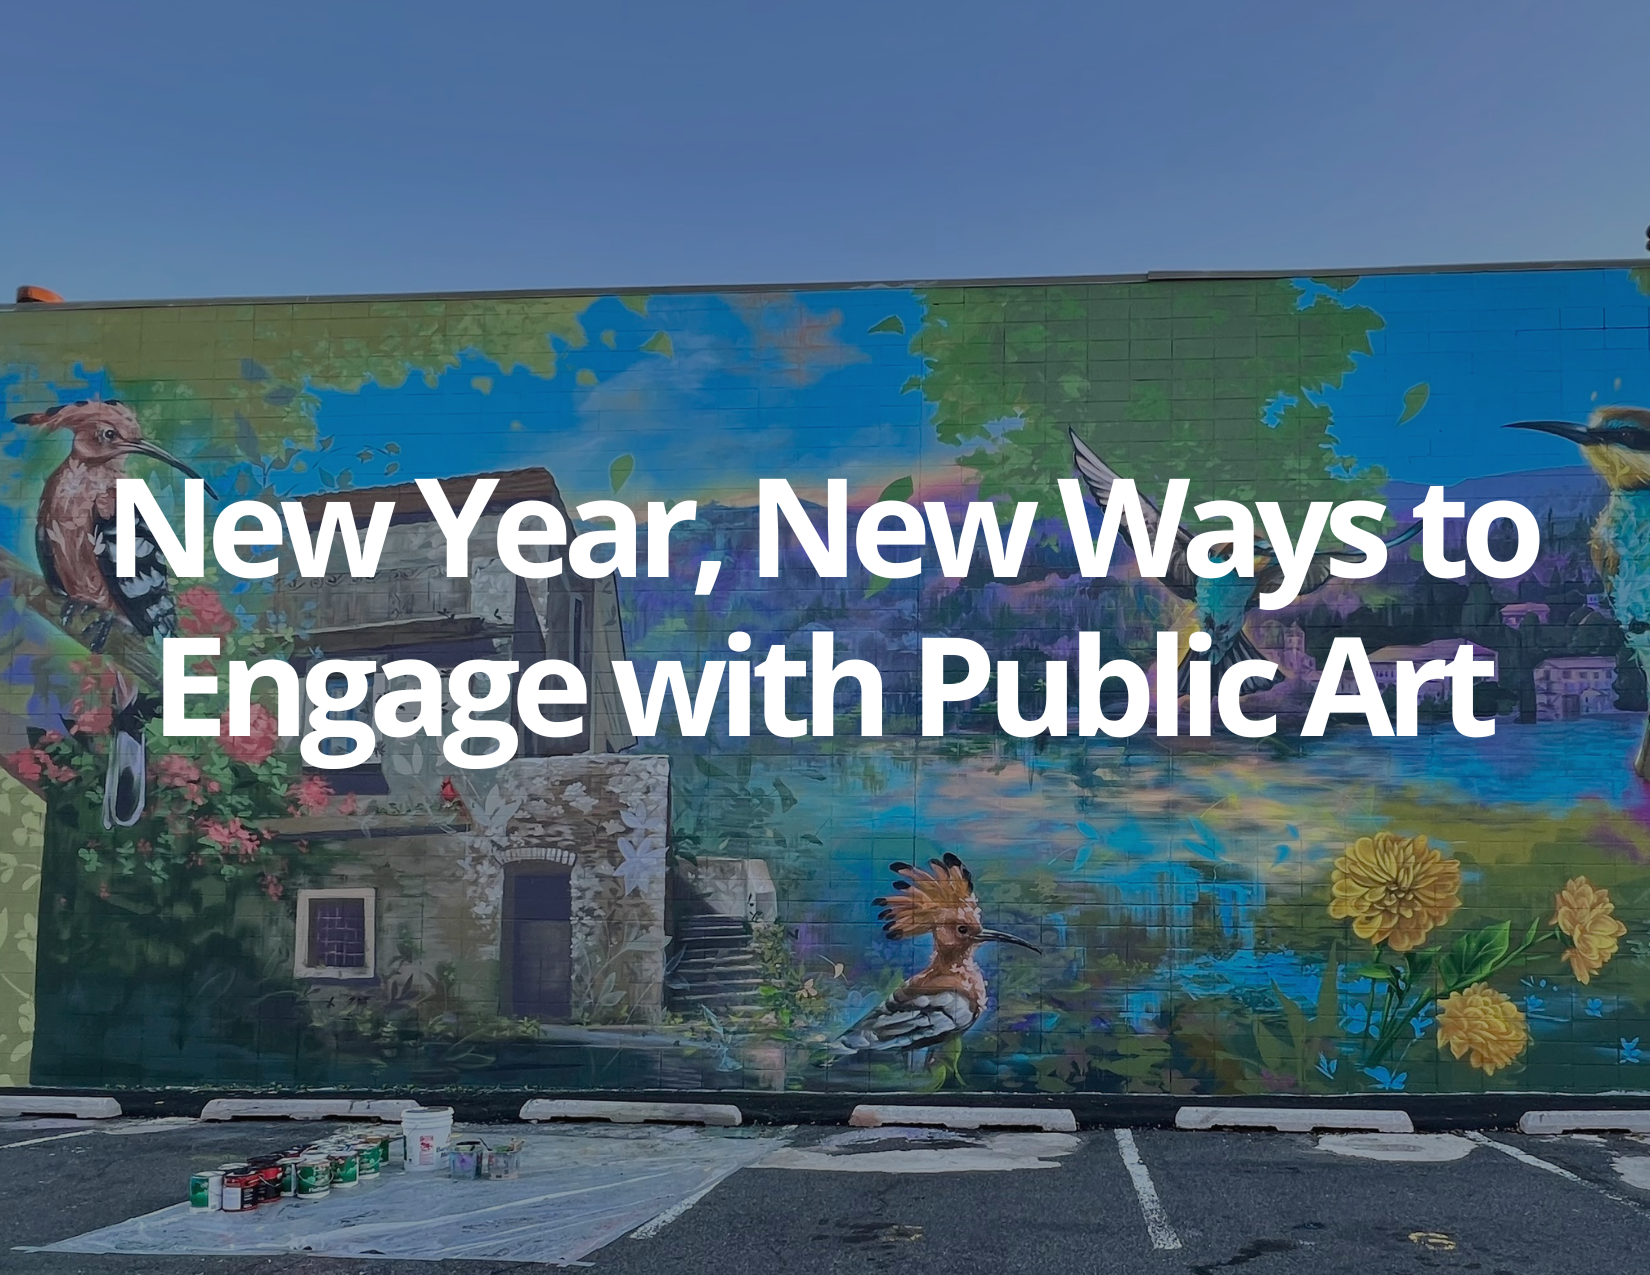 New Year, New Ways to Engage with Public Art placed on top of a colorful mural outside.